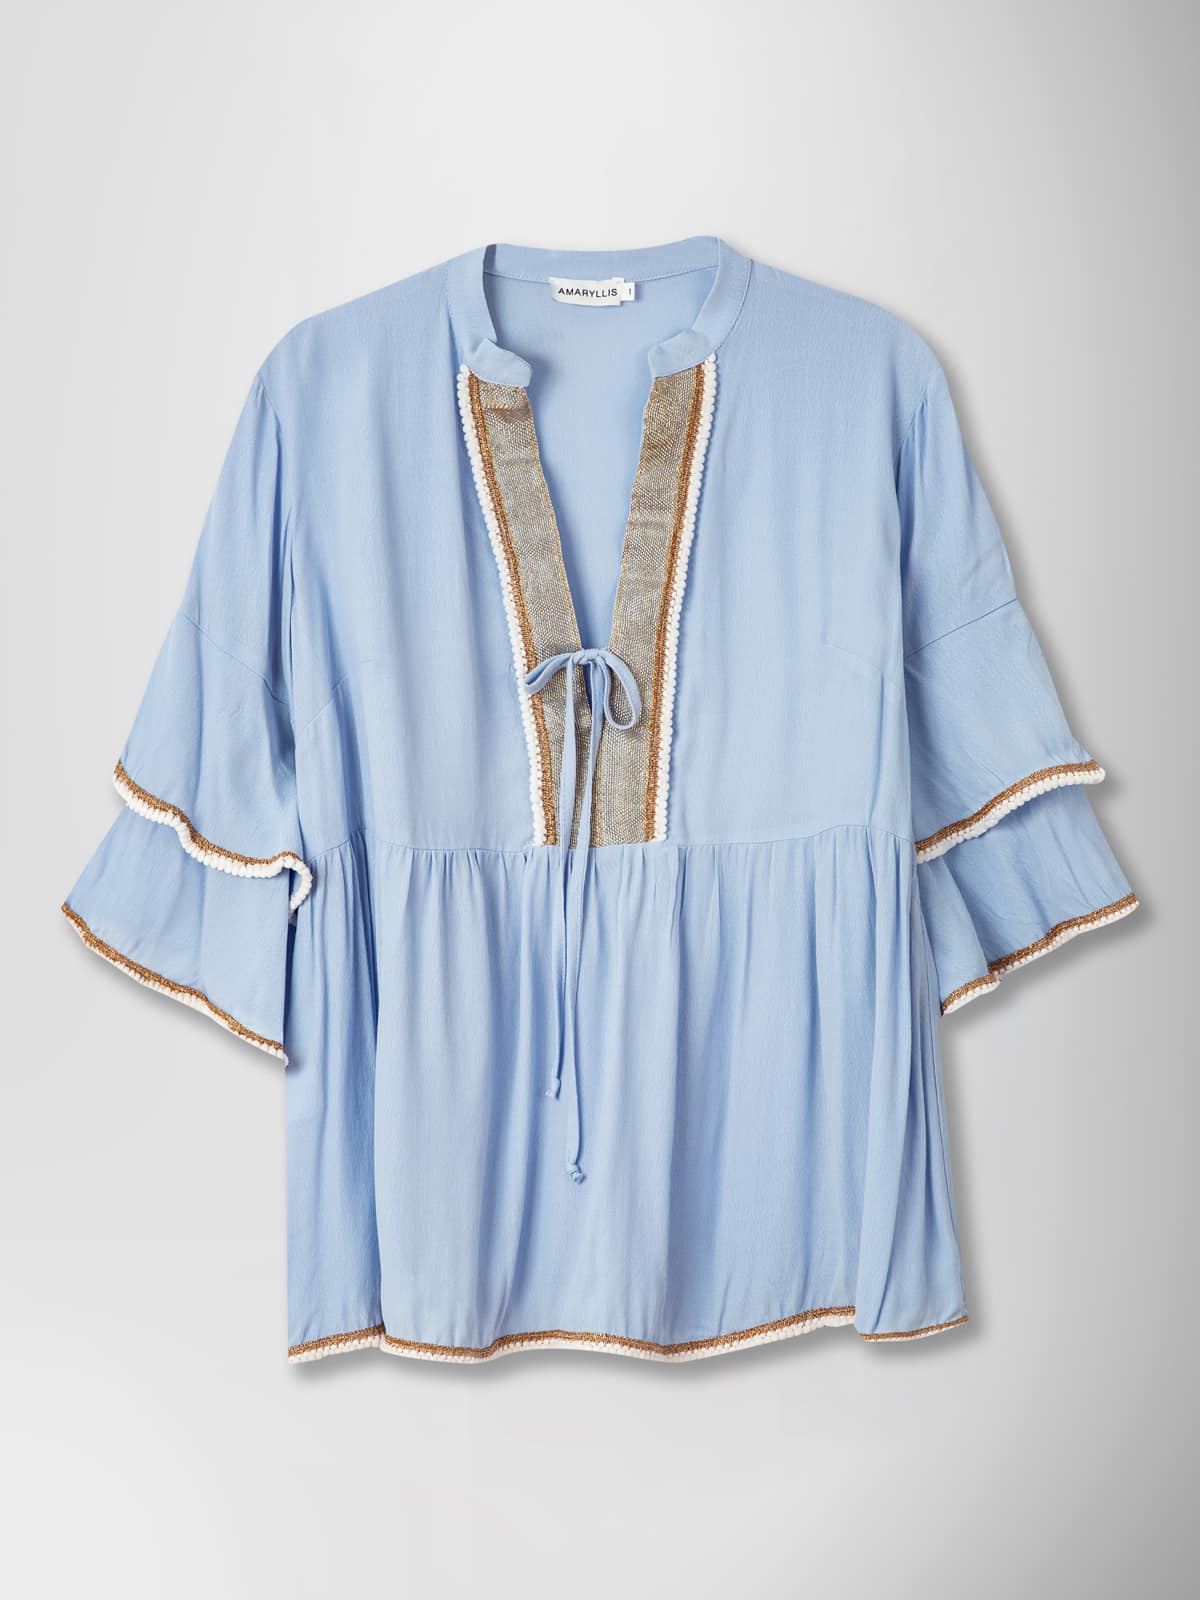 "PAPHIA" BLOUSE BLUE WITH GOLD FRILLS